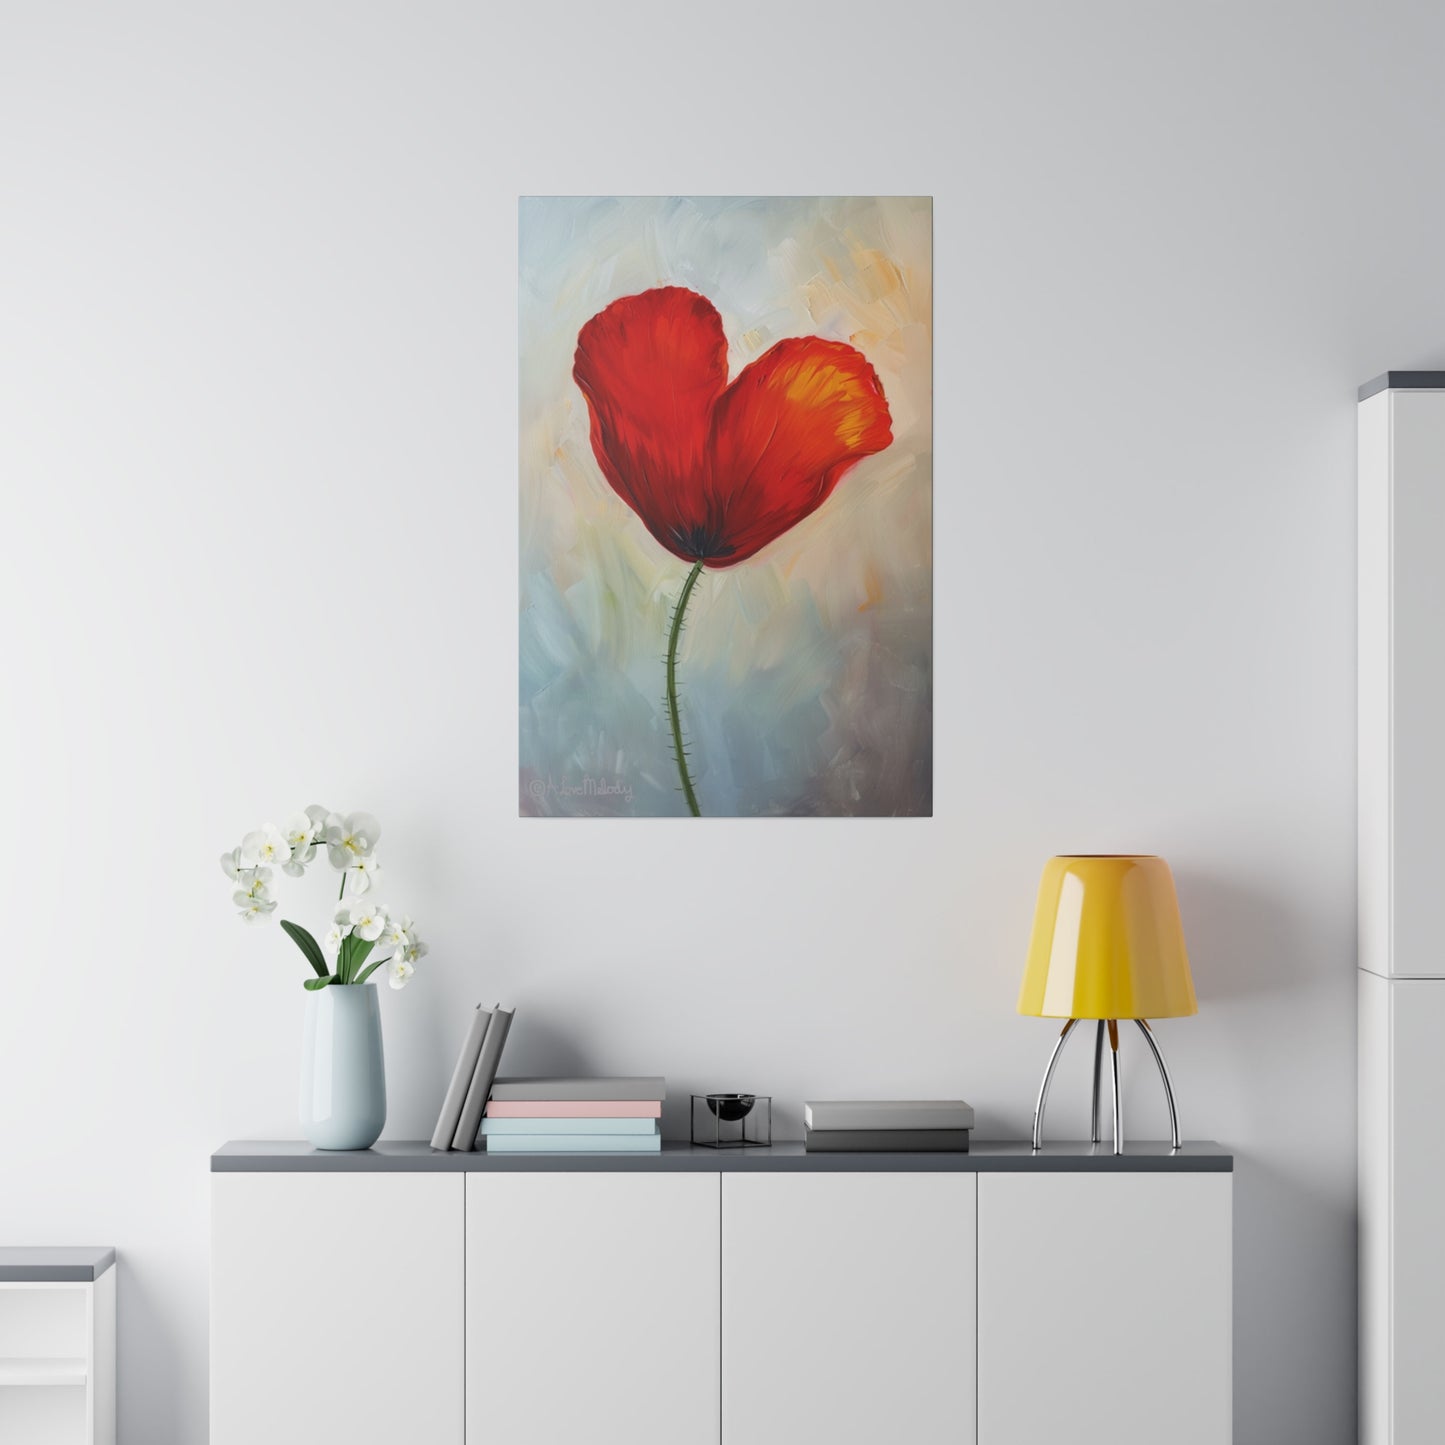 Poppy Flower Heart Painting Print on Matte Canvas, Stretched, 0.75"